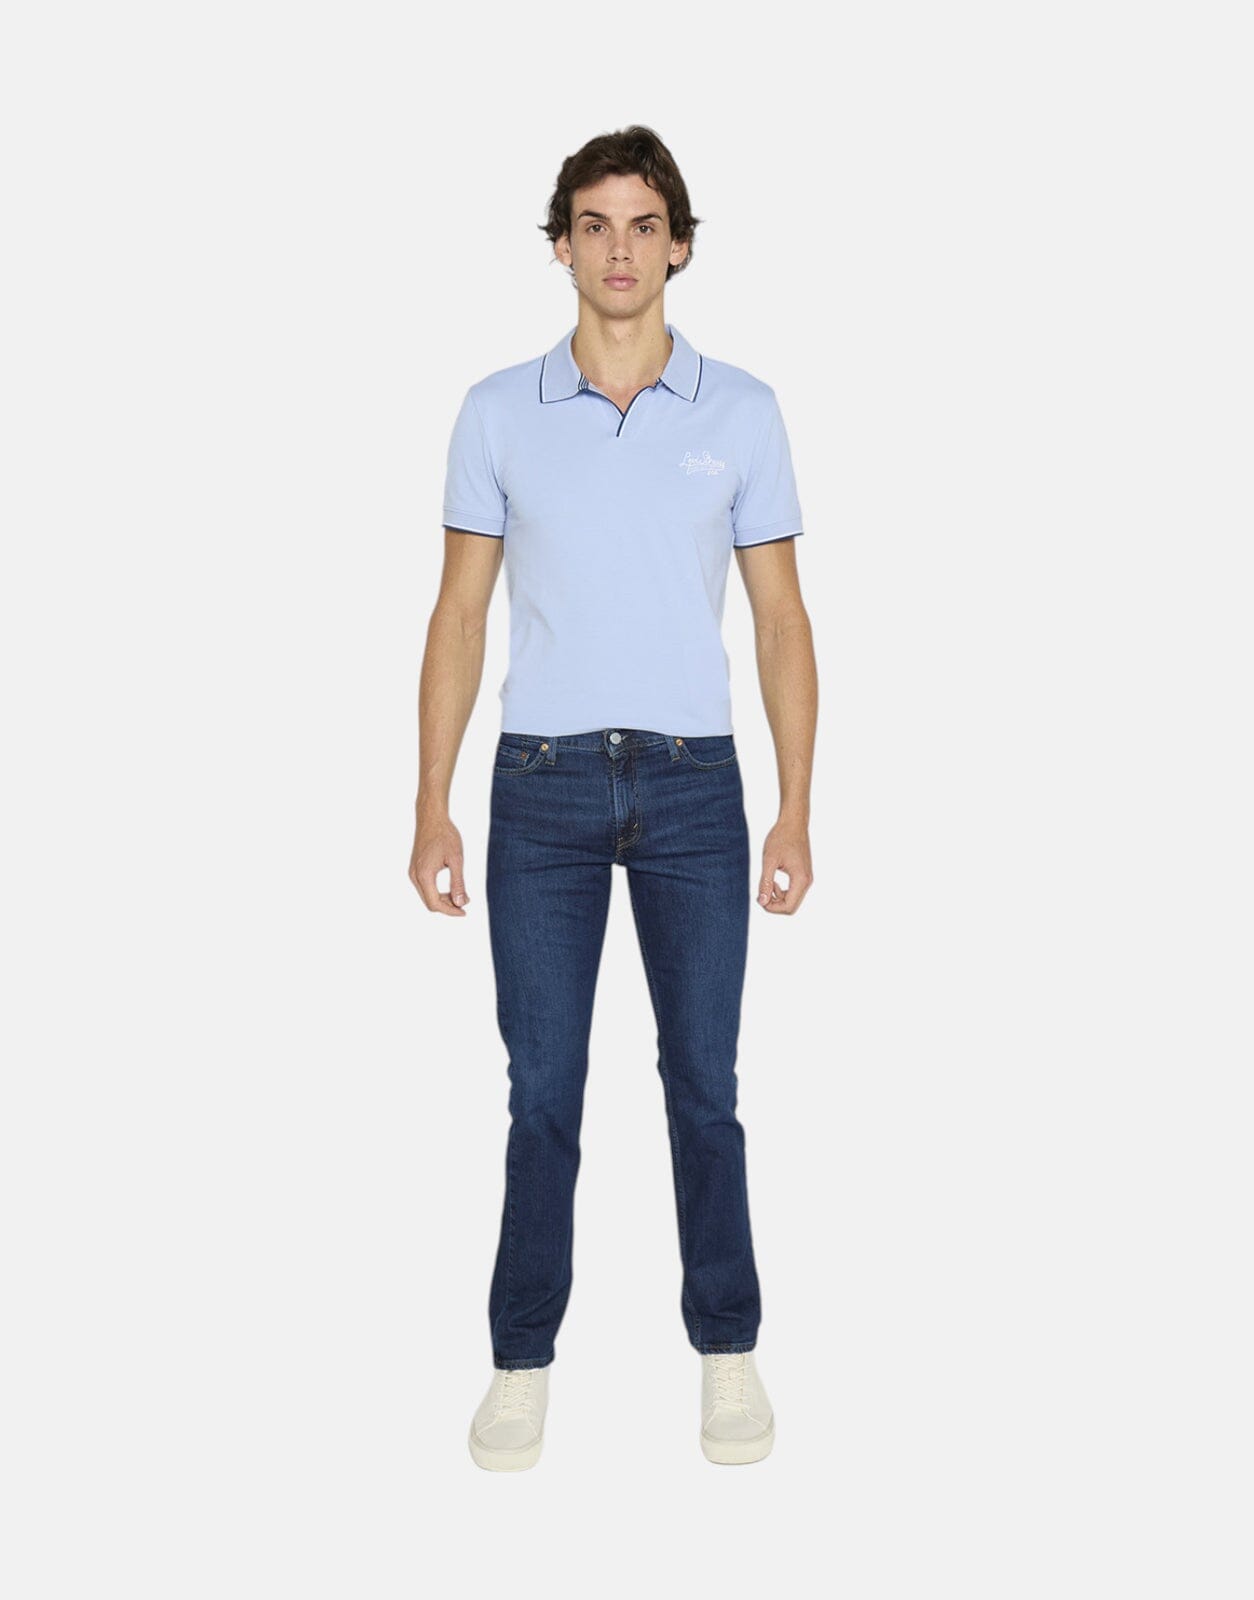 Levi's 511 Slim Jeans To Be Alone - Subwear